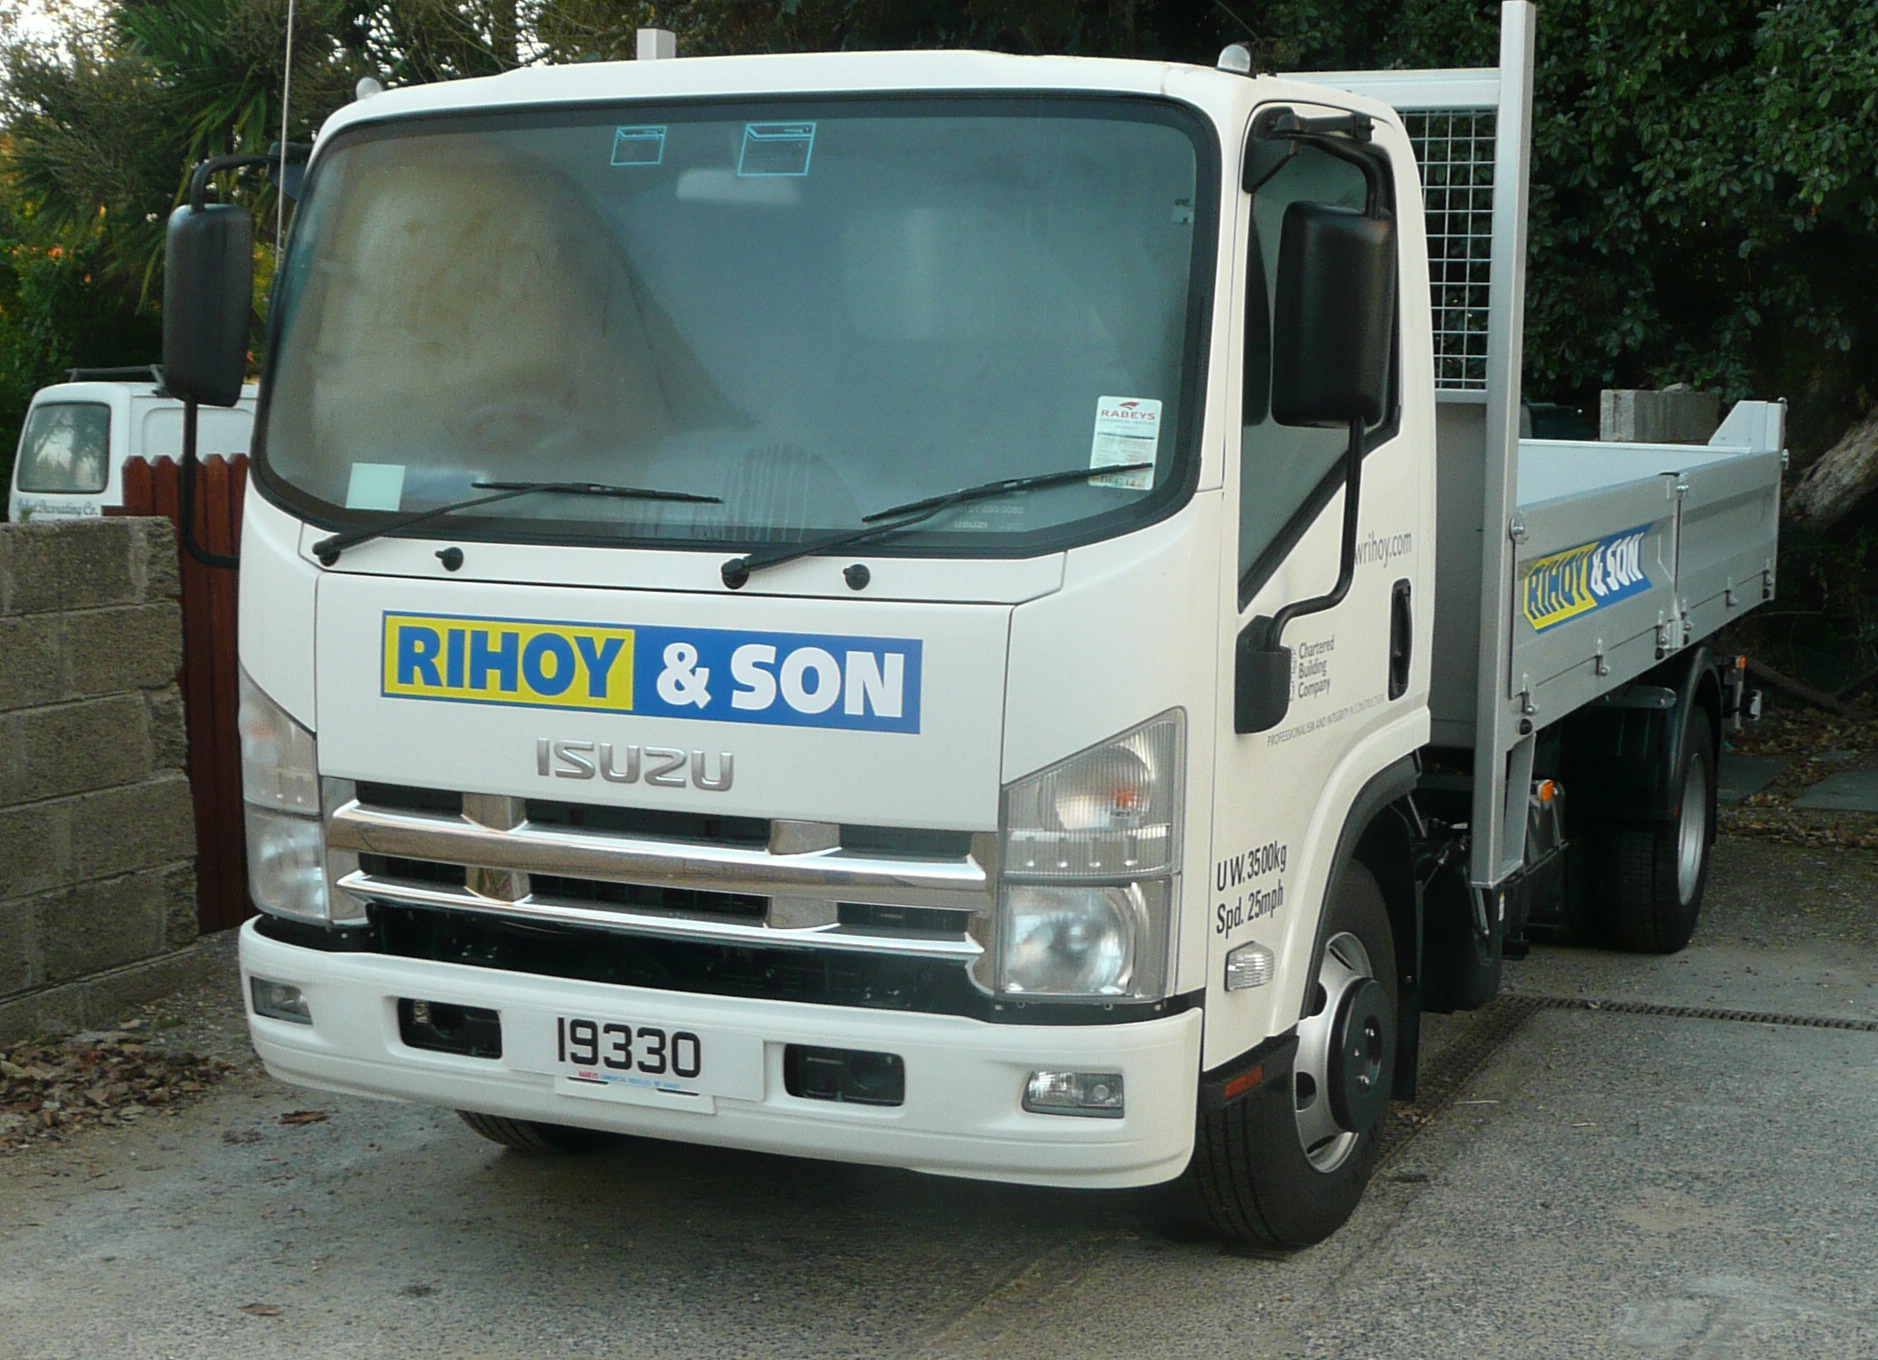 A new set of wheels for Rihoy & Son